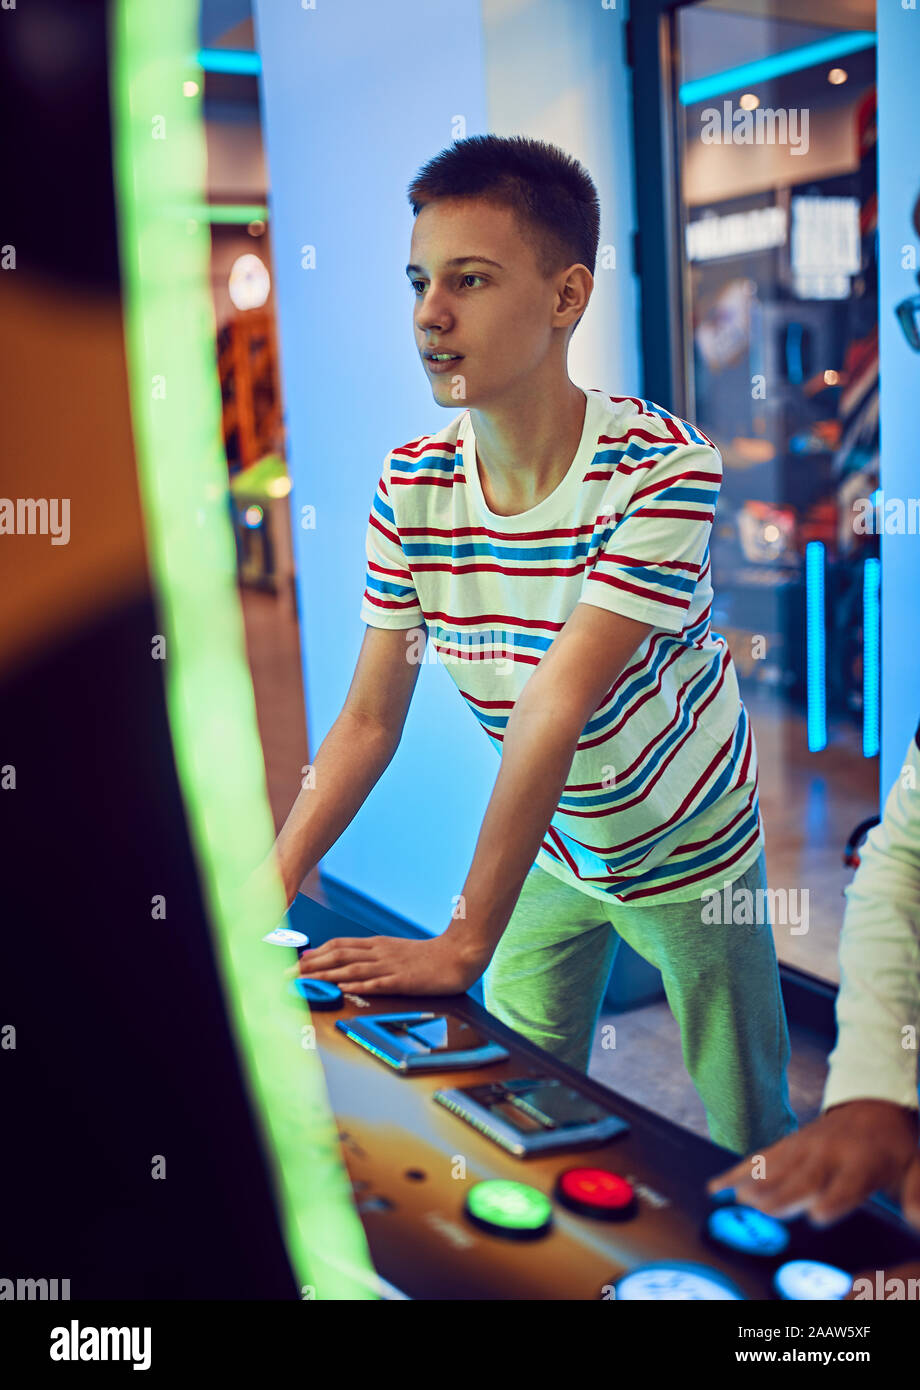 Teenage boy playing with a gaming machine in an amusement arcade Stock Photo